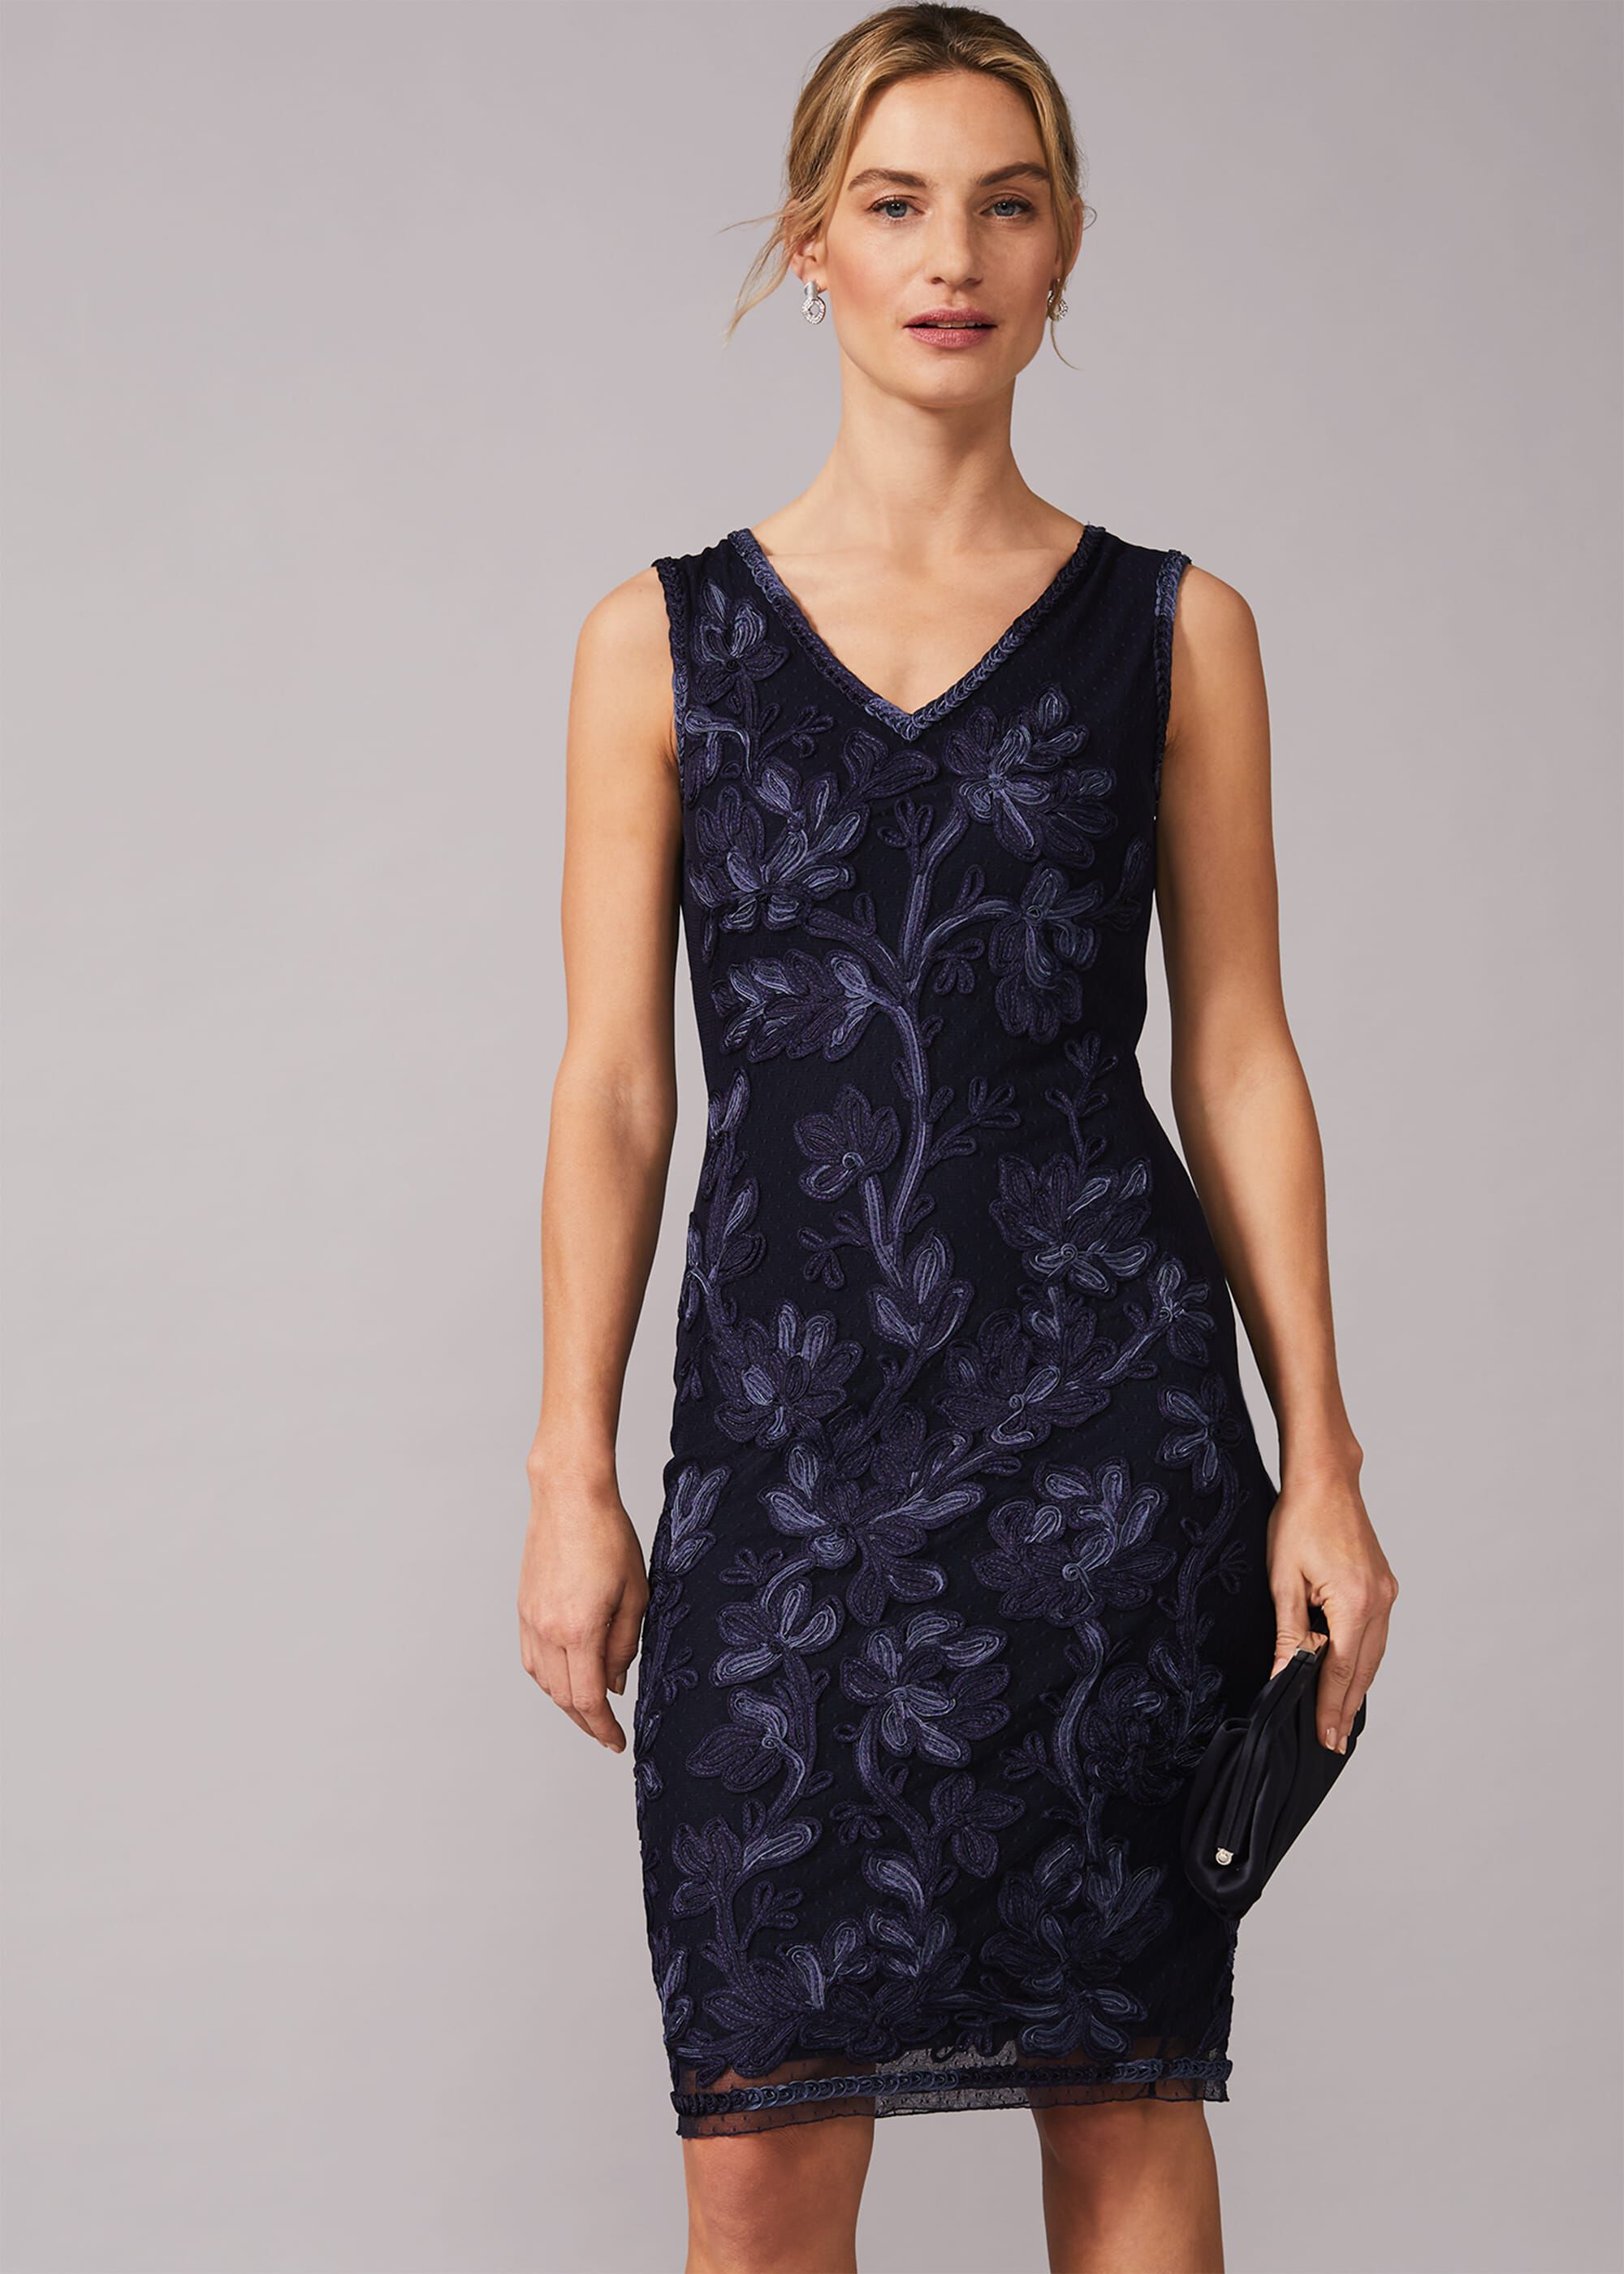 ann taylor mother of the bride dresses